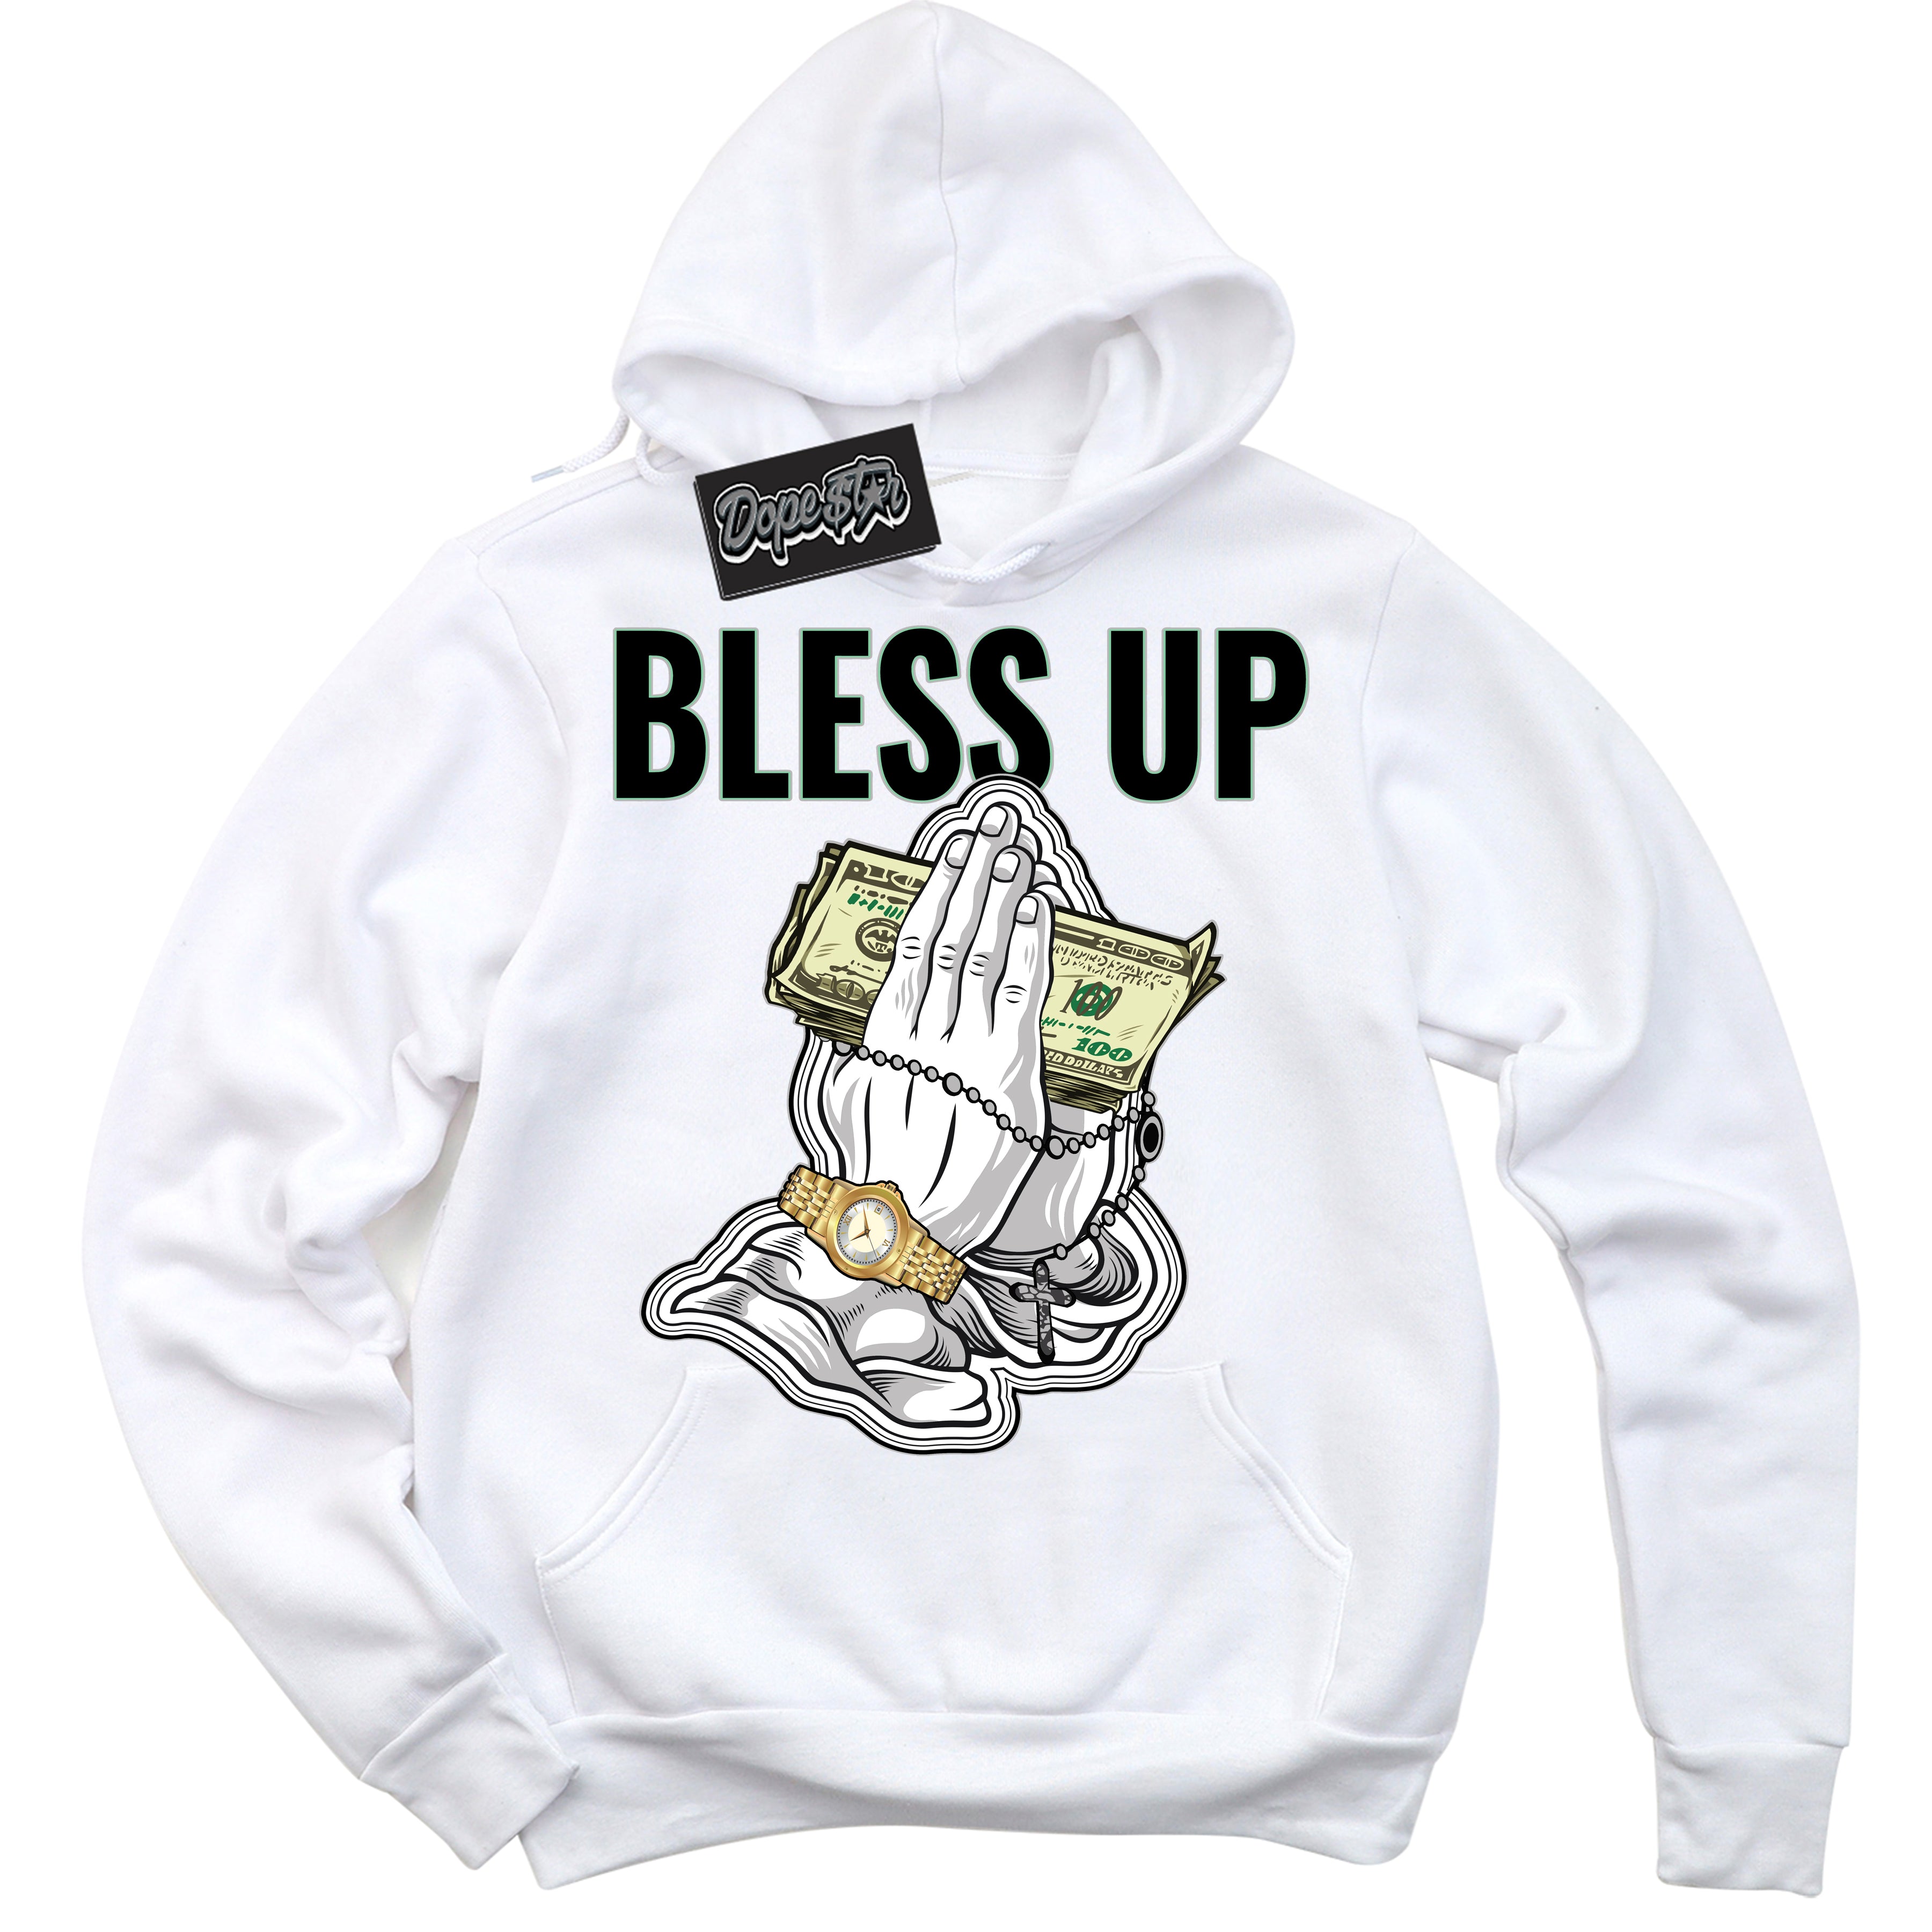 Cool White Graphic DopeStar Hoodie with “ Bless Up “ print, that perfectly matches Green Glow 3s sneakers